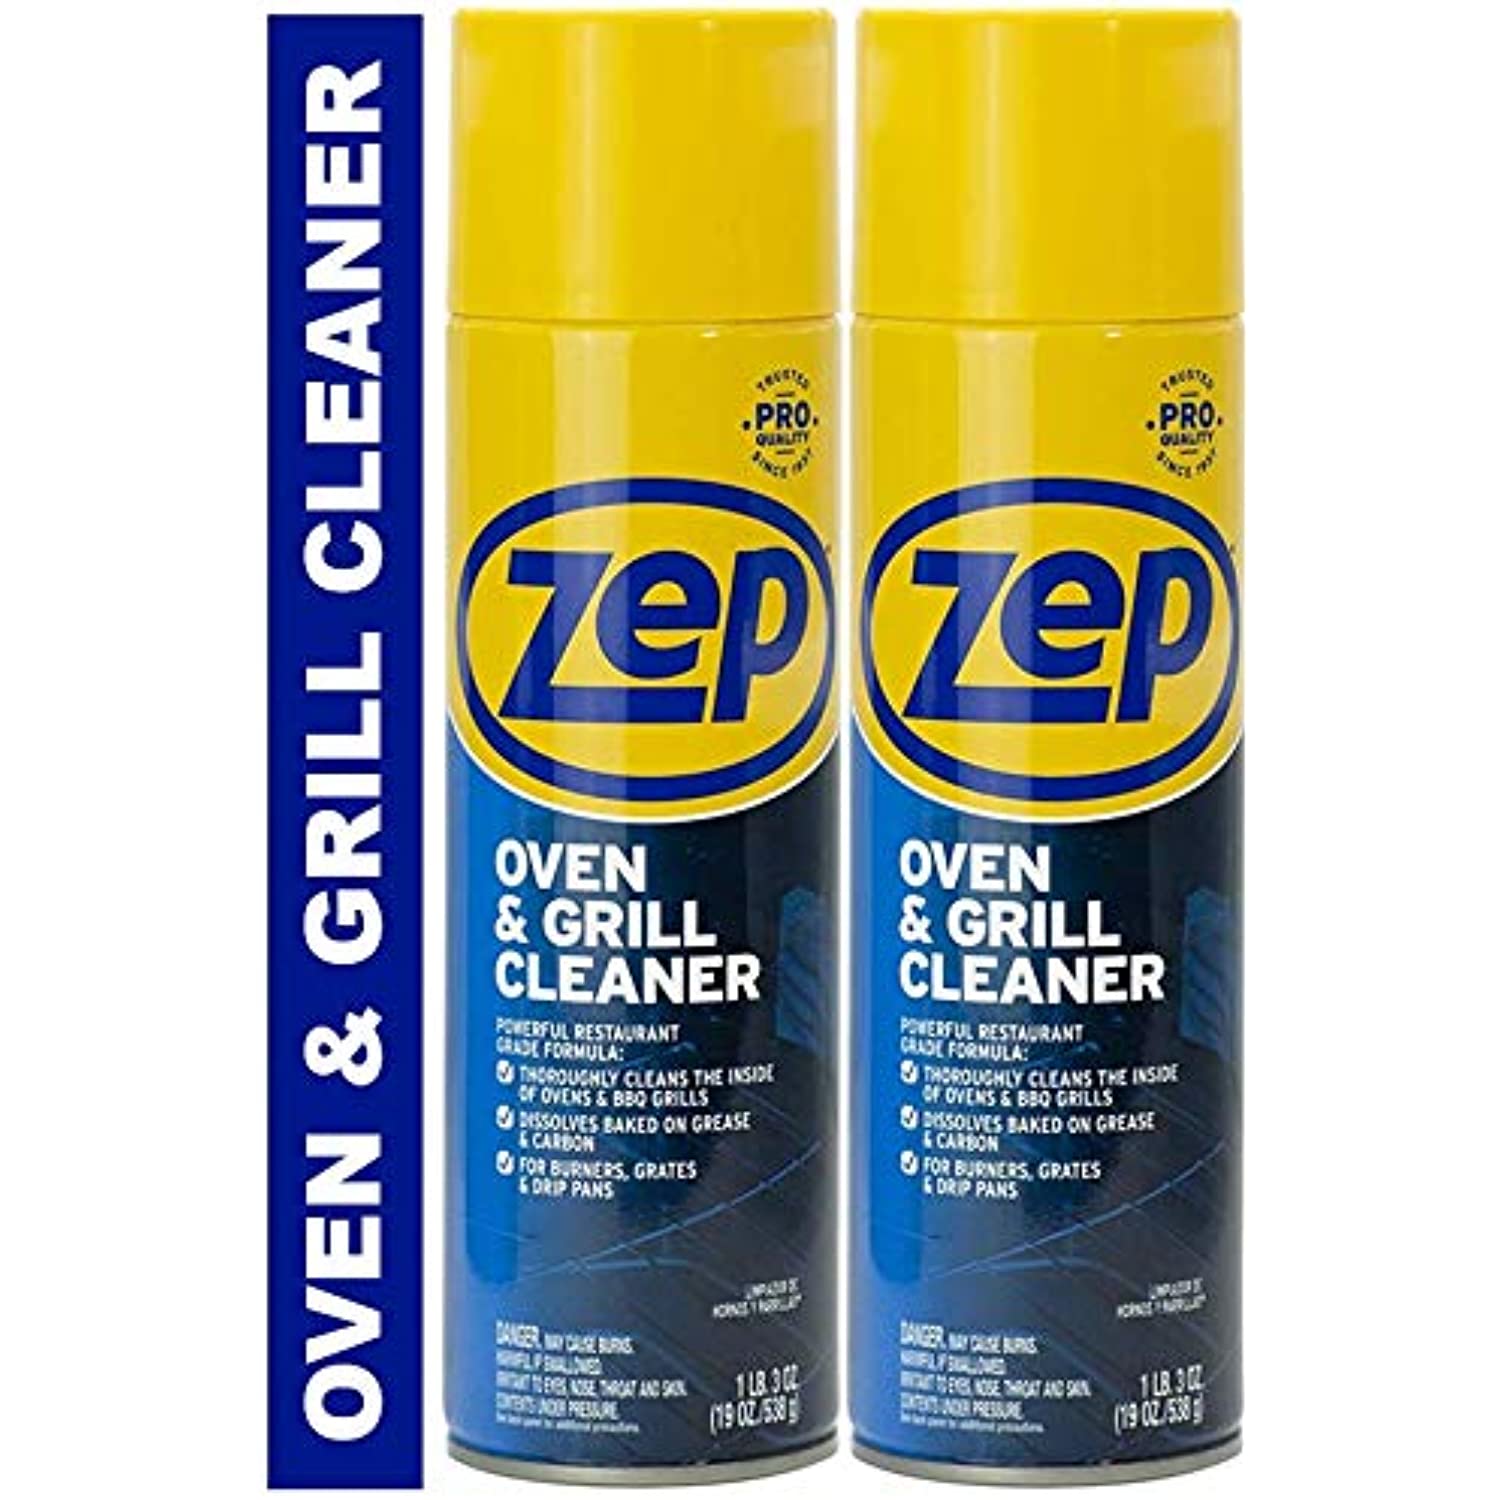 Zep Heavy-Duty Oven and Grill Cleaner ZUOVGR19 (2-Pack) Dissolves Grease on Contact